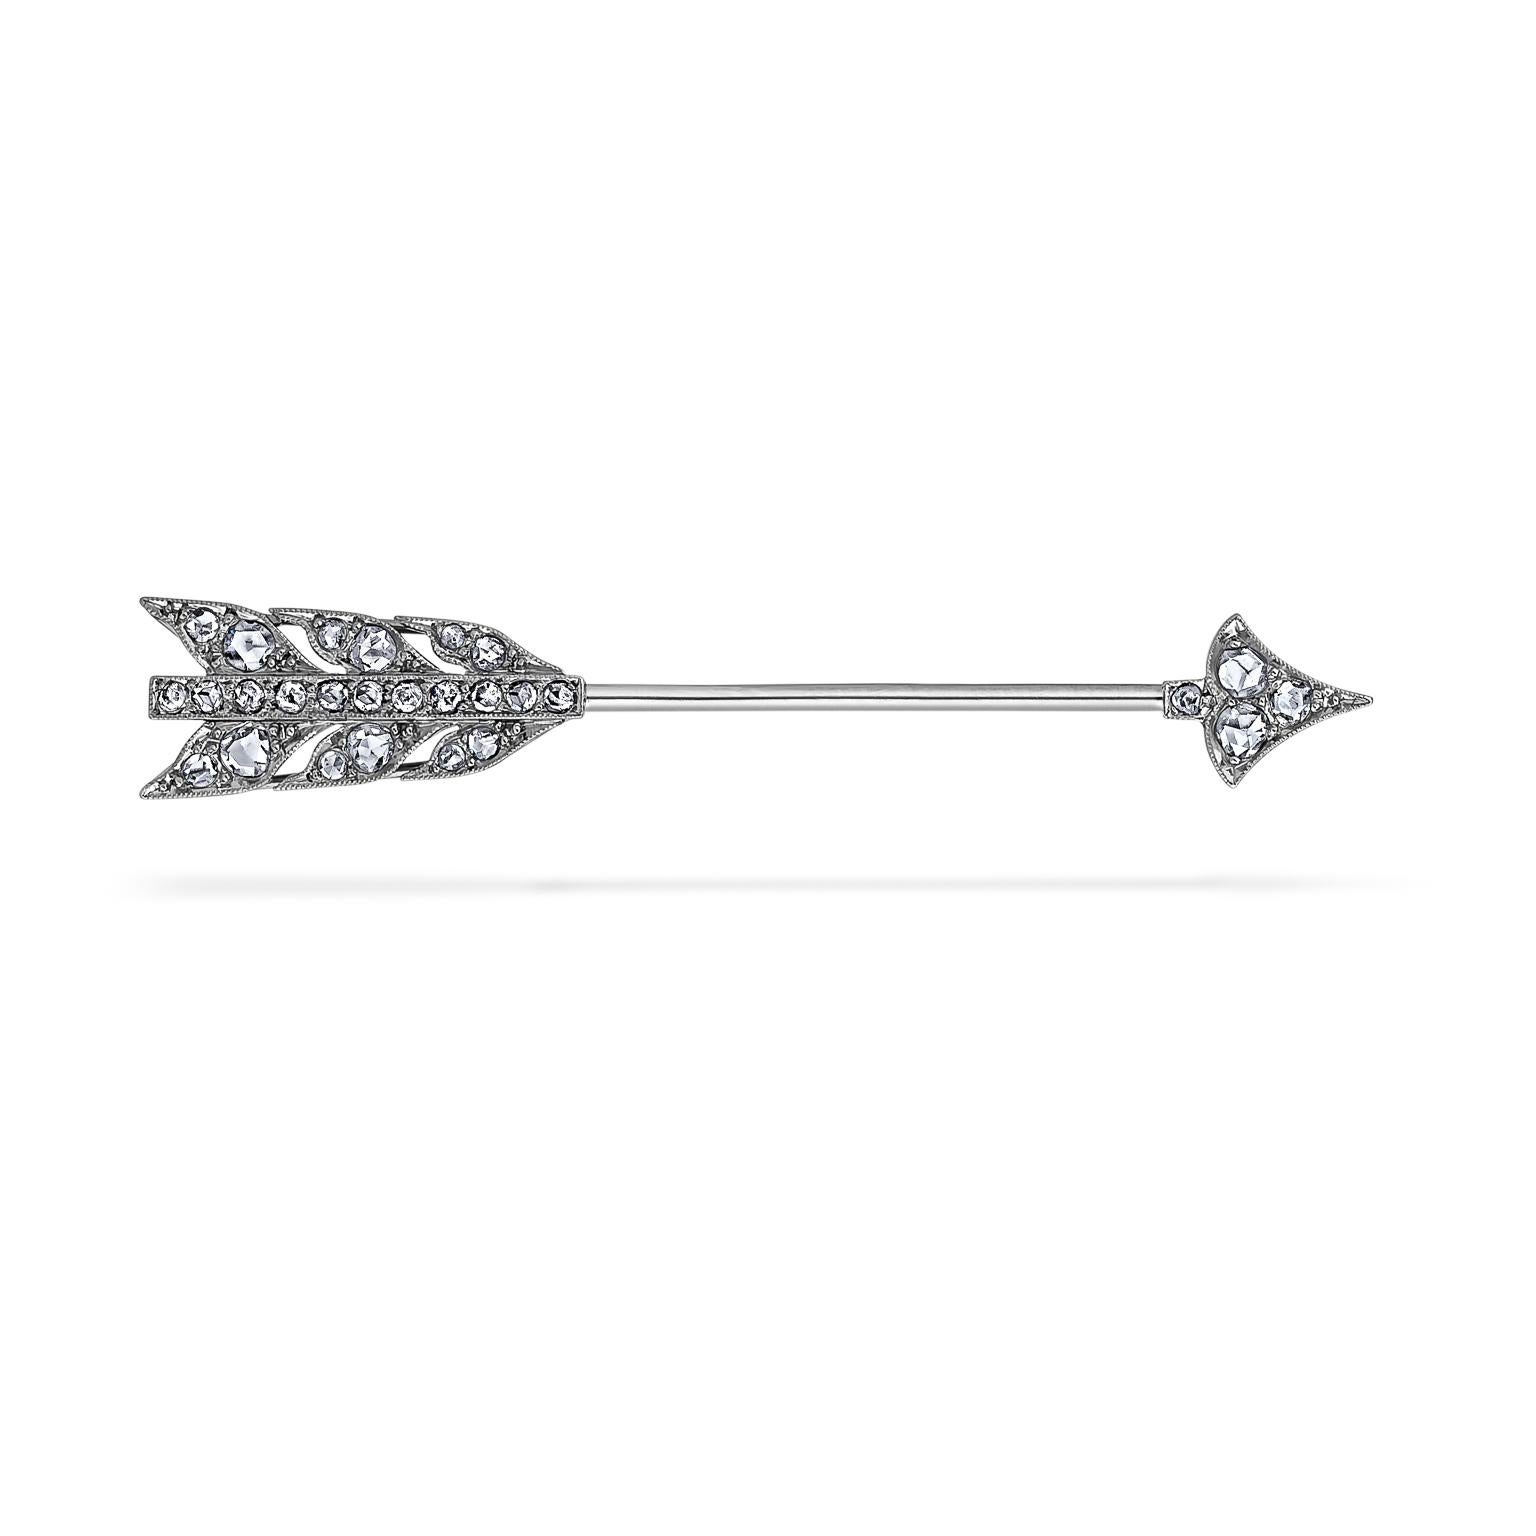 Your love will always be 'straighter than an arrow' when wearing this Cartier Paris Art Deco Diamond Platinum Gold brooch.  With a total of approximately .35 carats of round cut dazzling diamonds mounted in platinum, this elegant arrow pin is sure